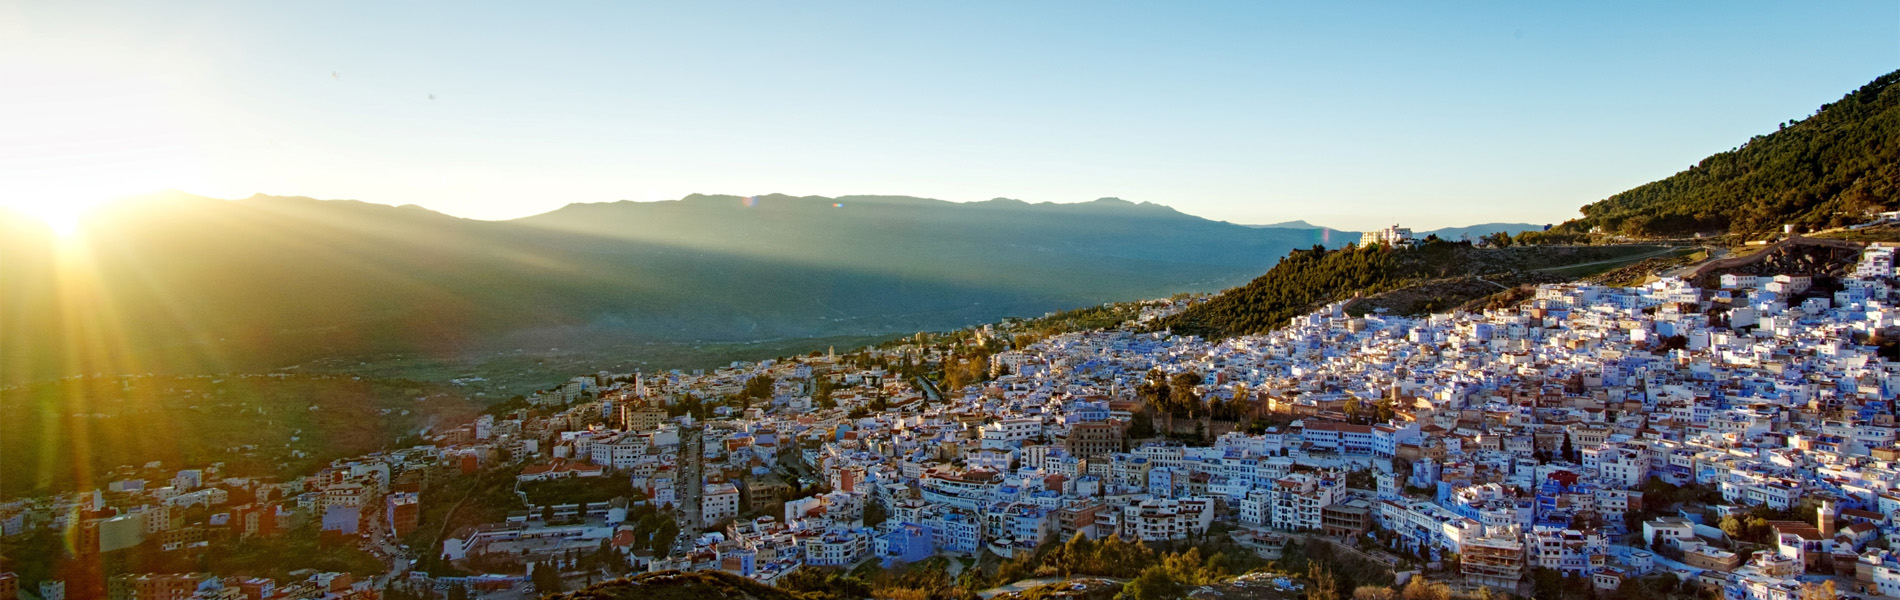 Professional Photoshoot in Chefchaouen